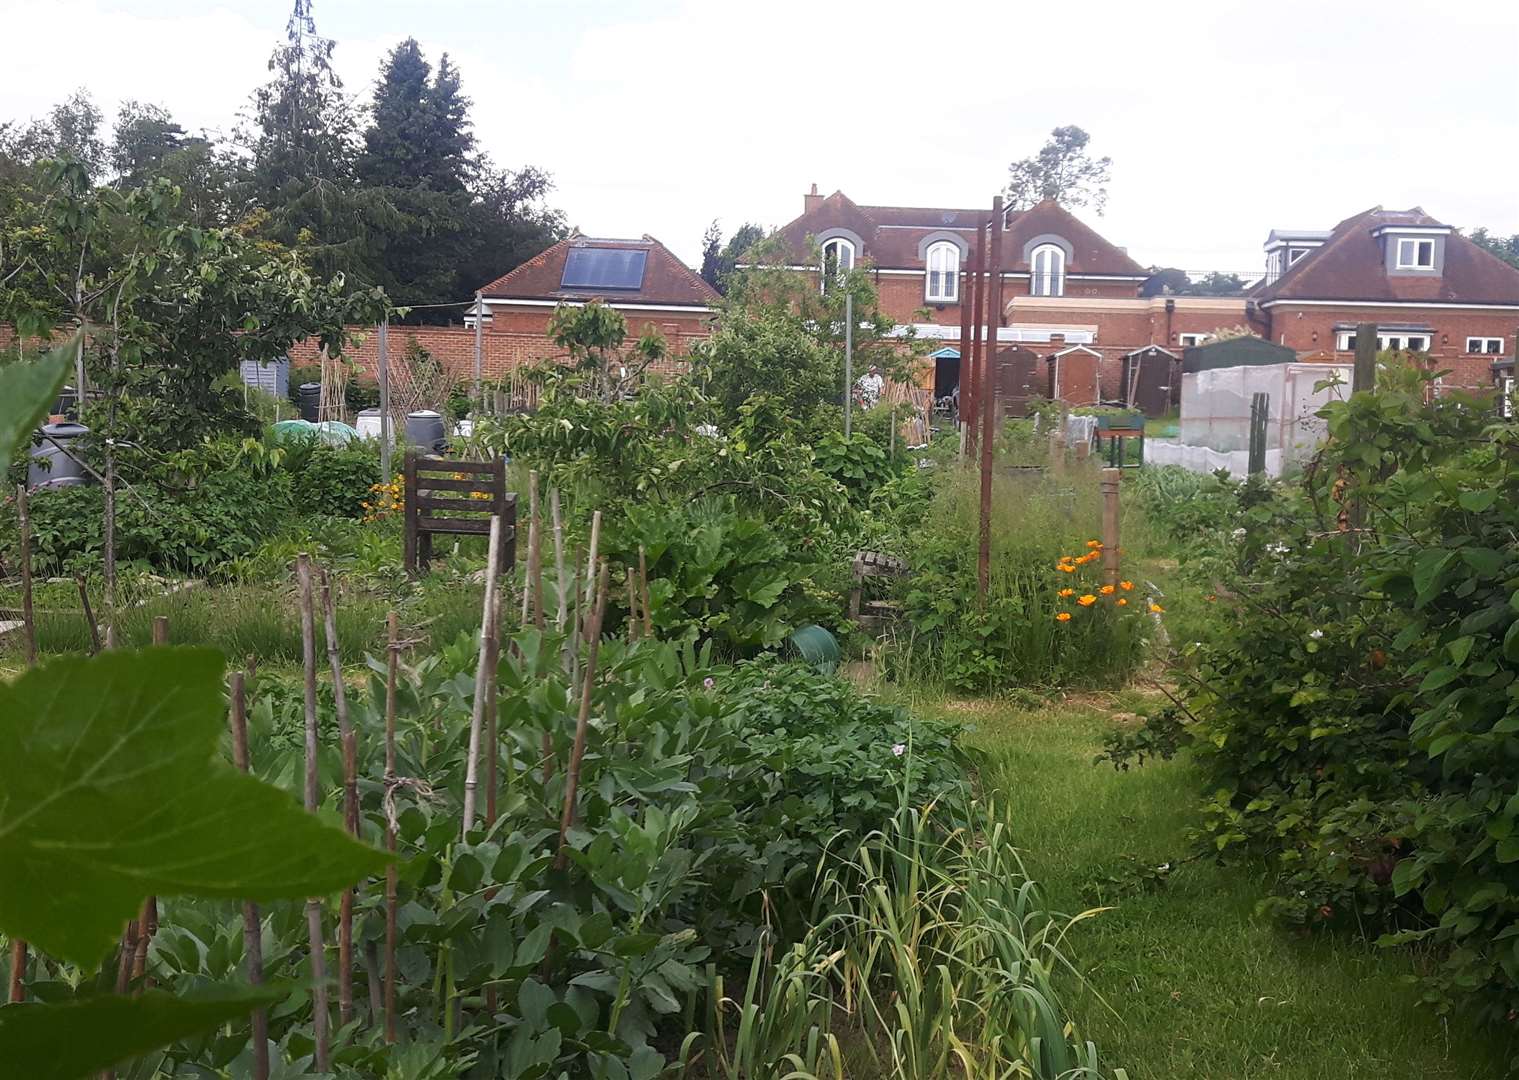 The Church Landway allotment site